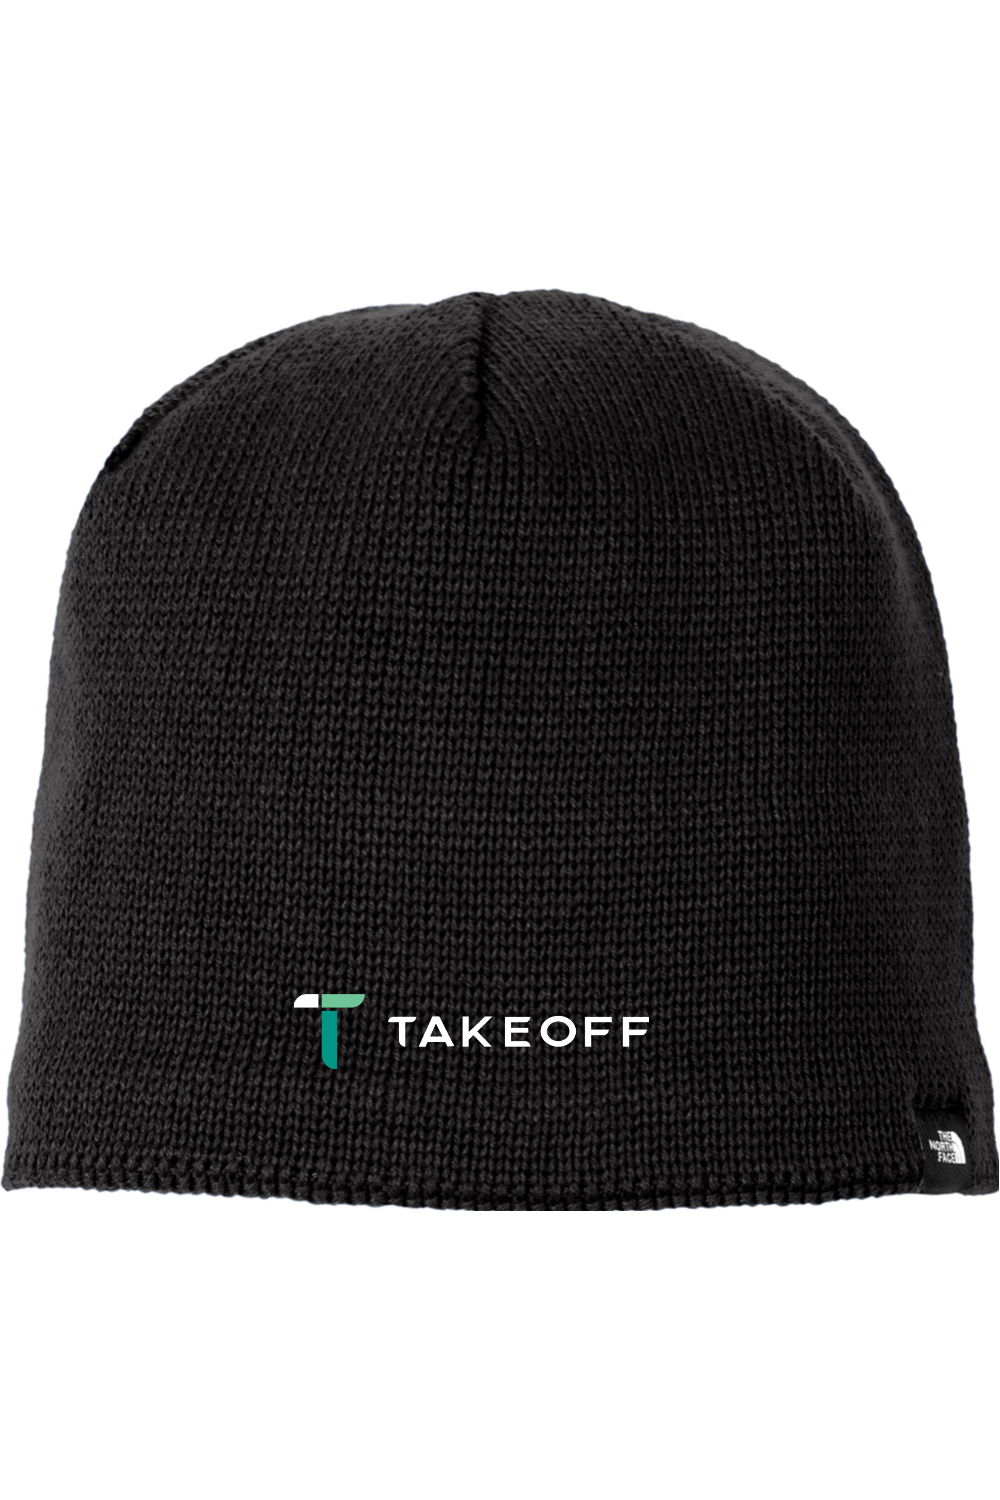 Take off - The North Face Mountain Beanie